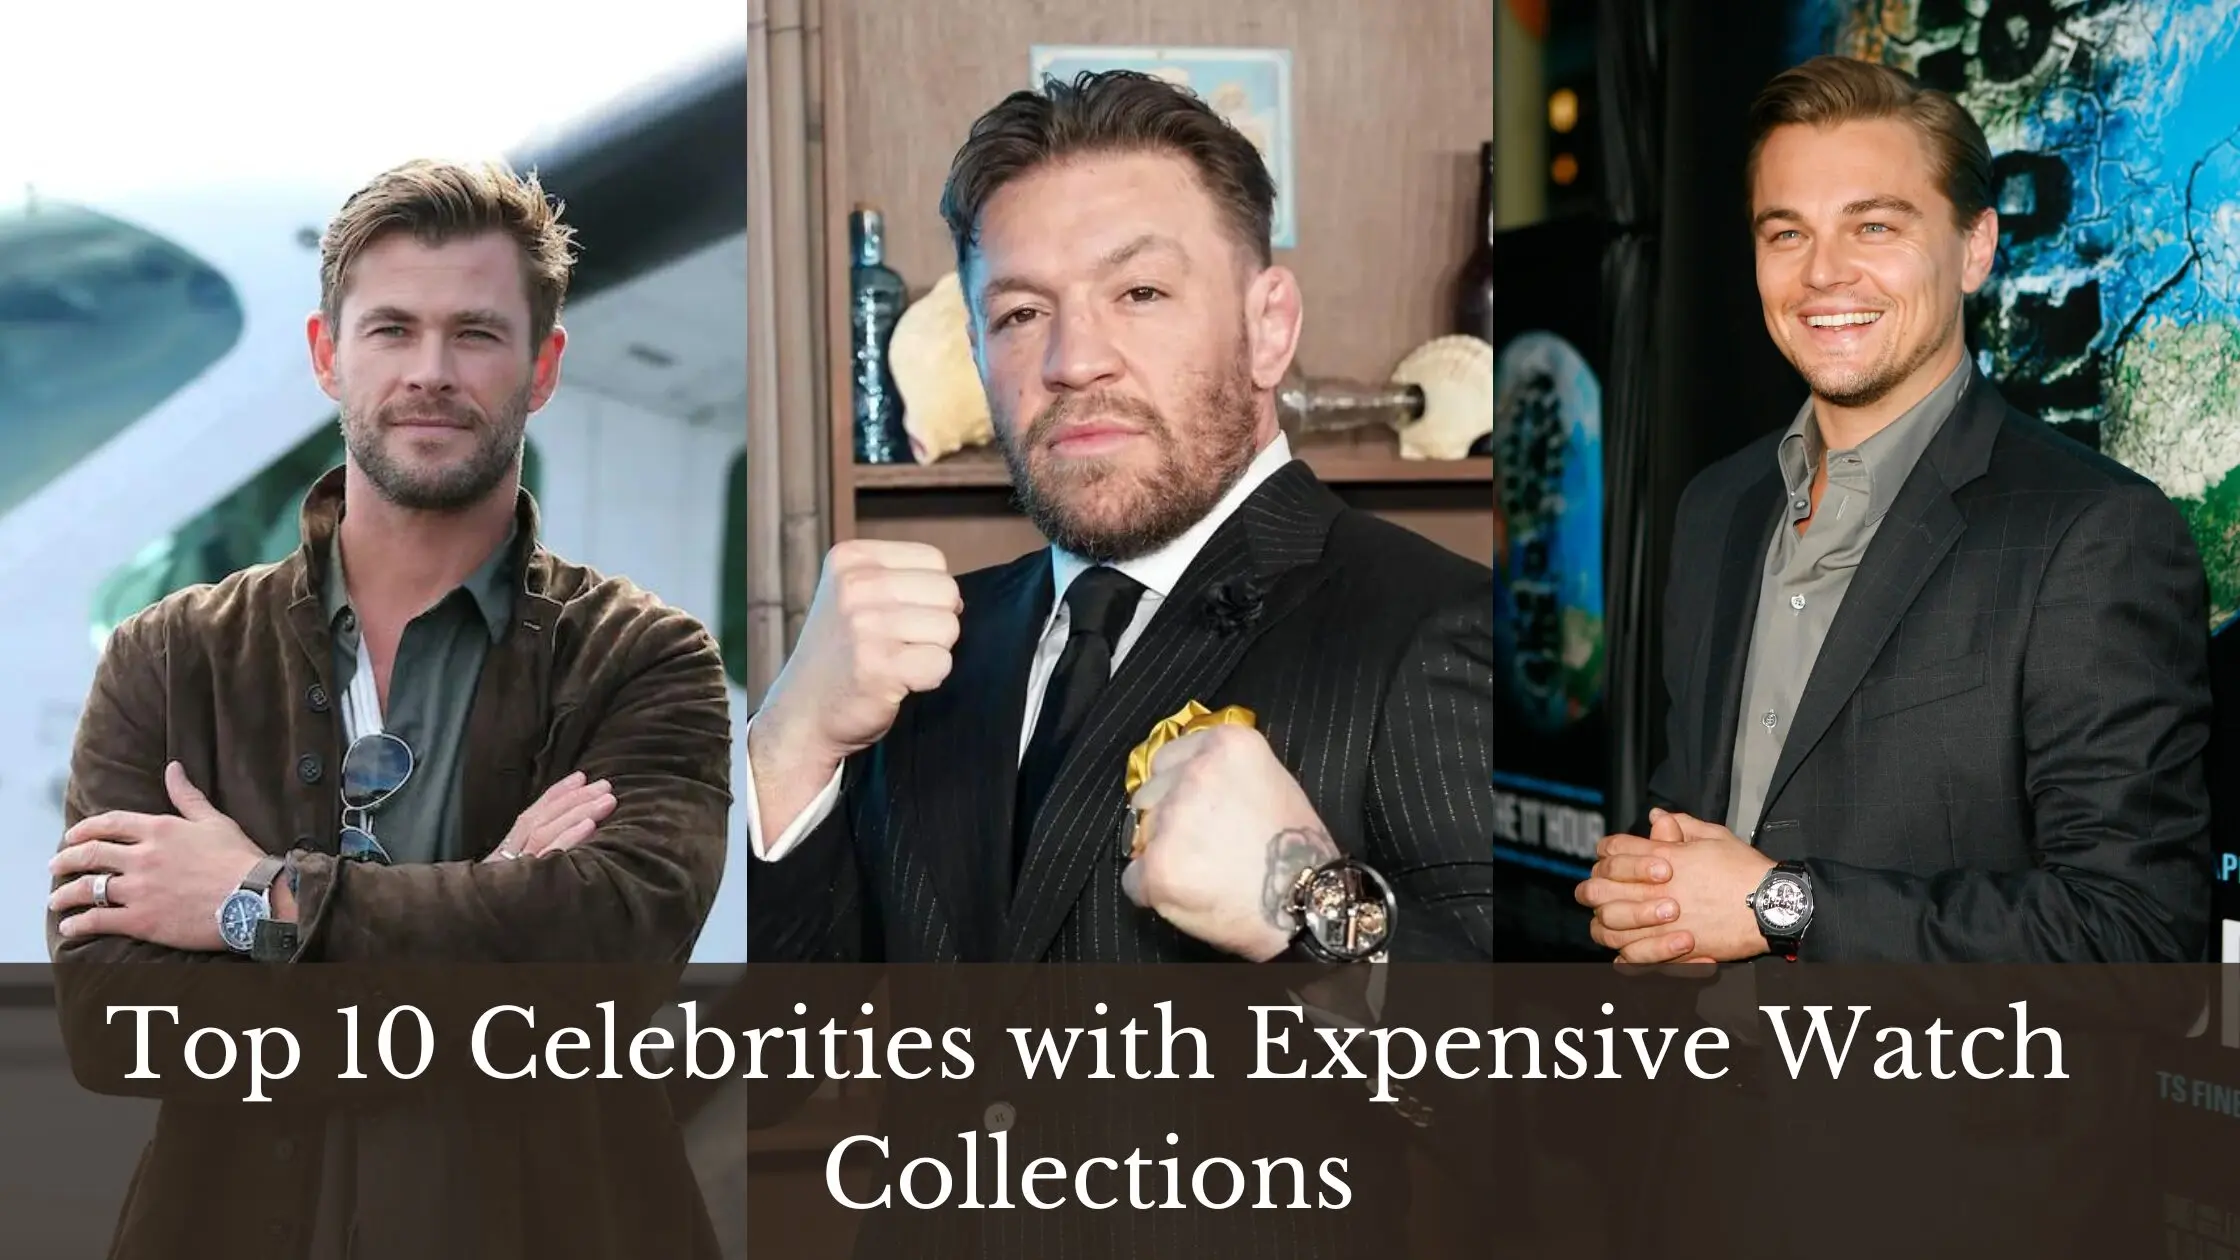 Top 10 Celebrities with Expensive Watch Collections